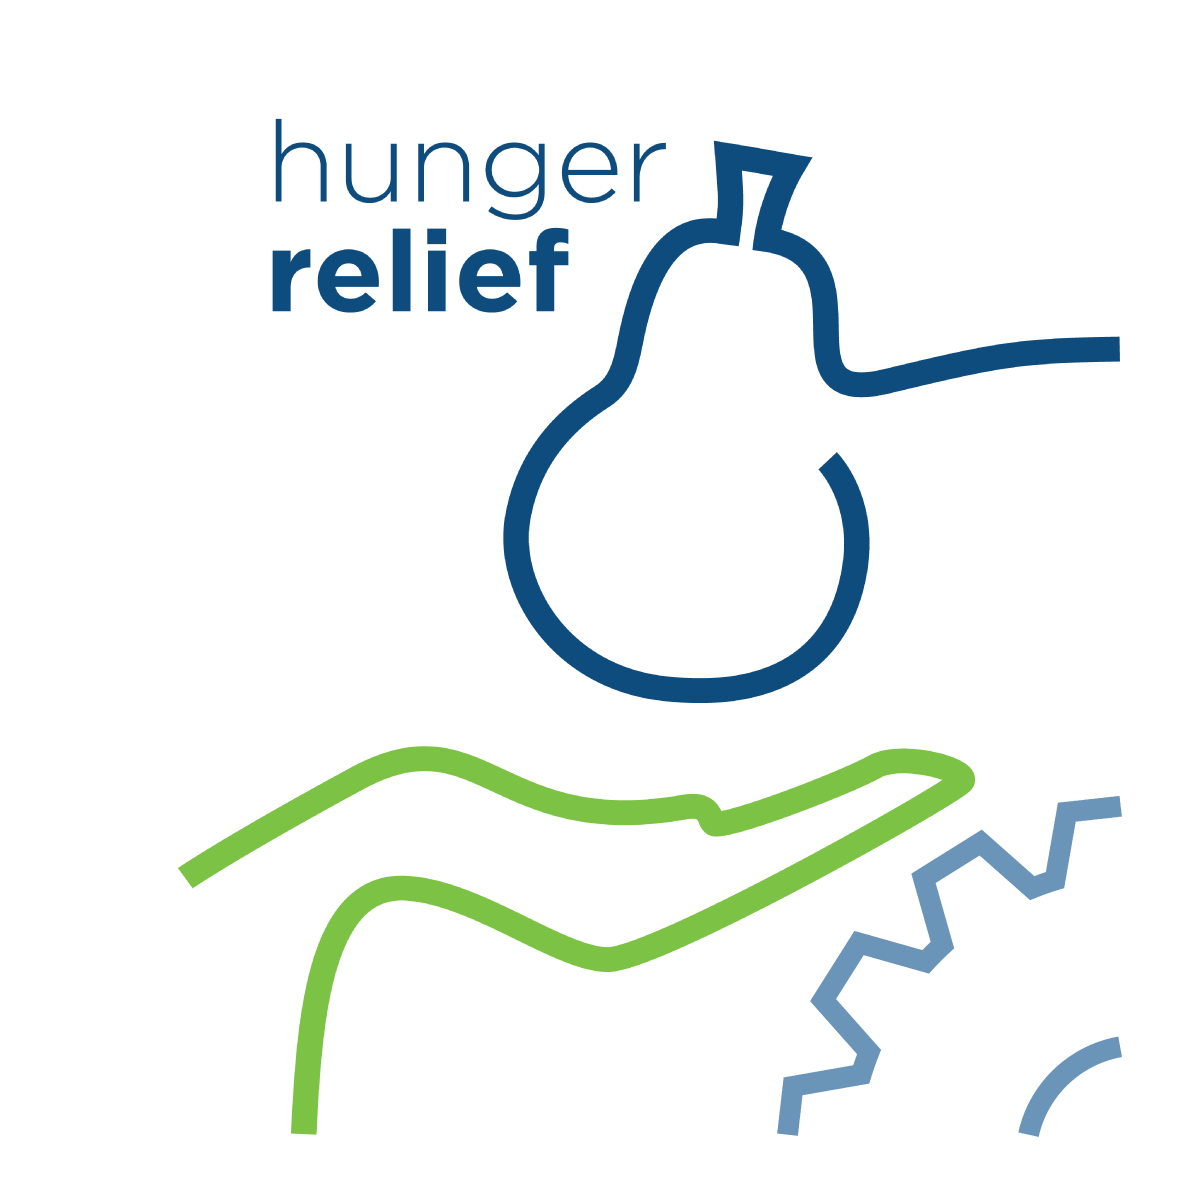 Hunger relief